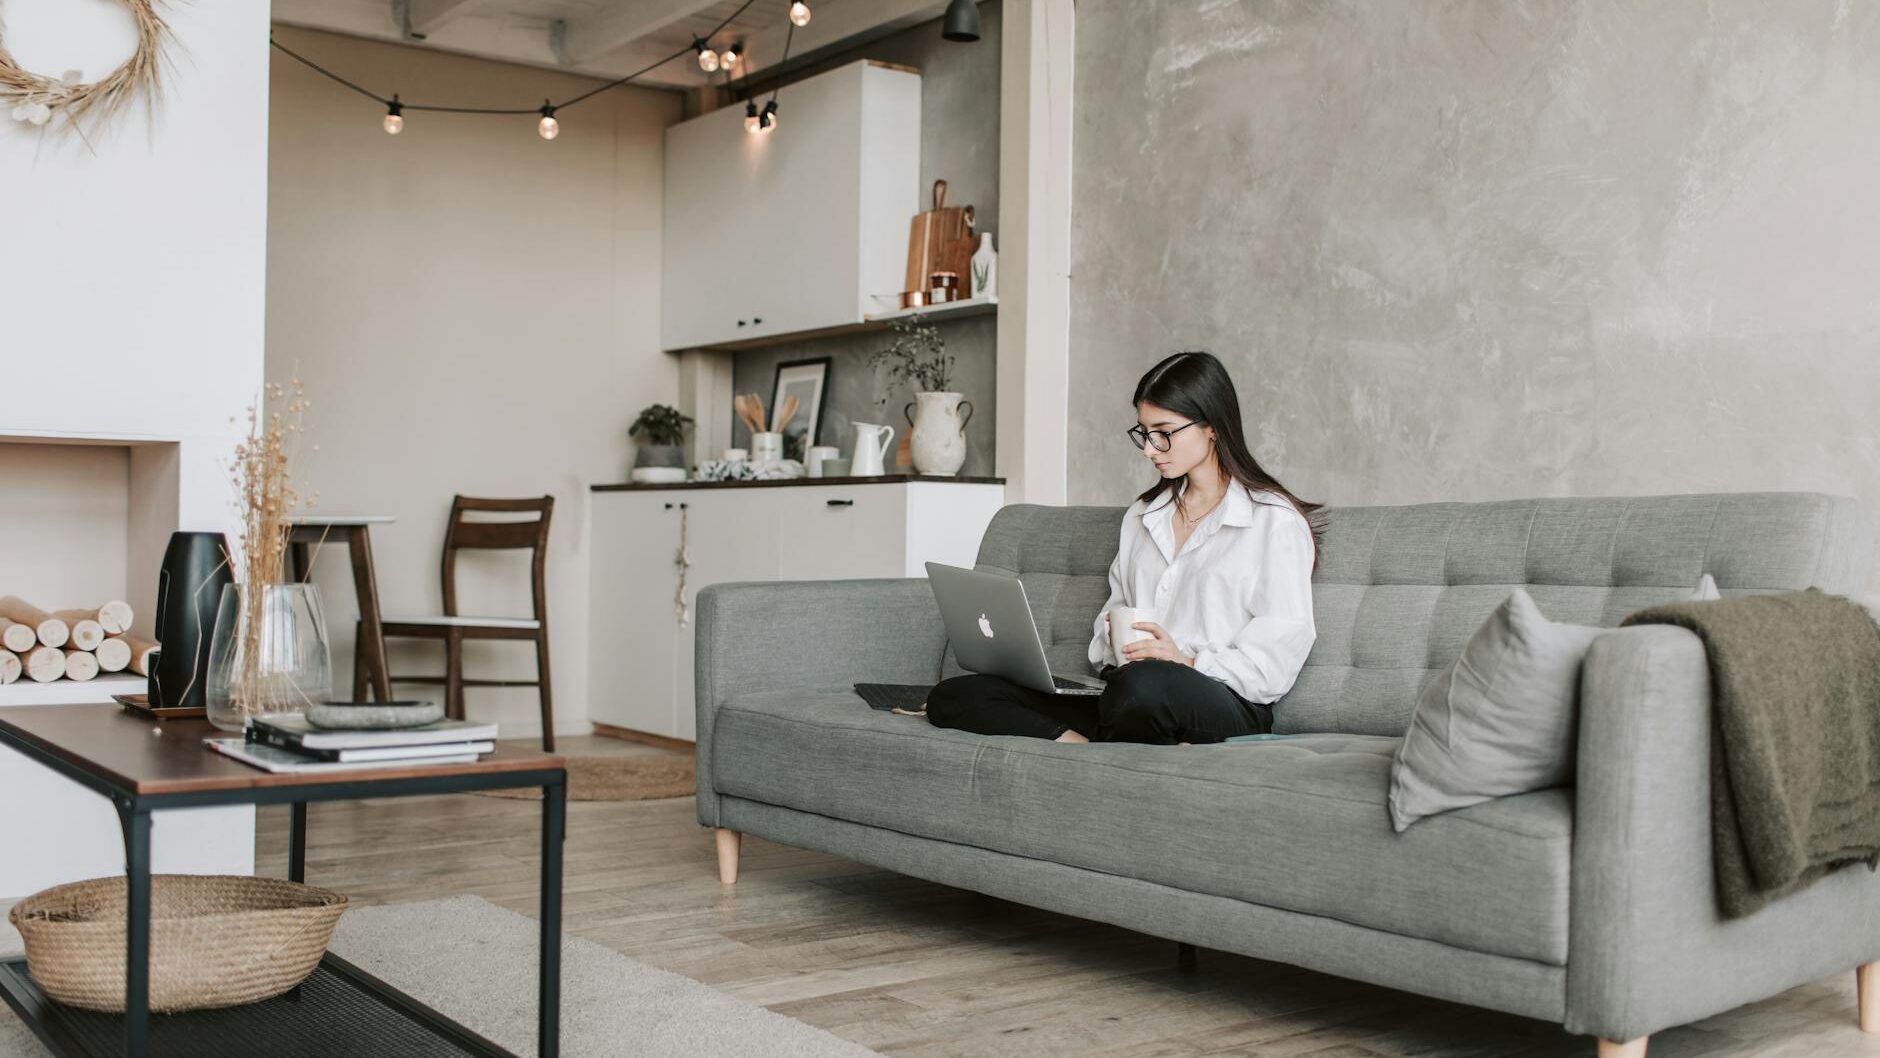 reason minimalist
woman sitting on a sofa while working with laptop